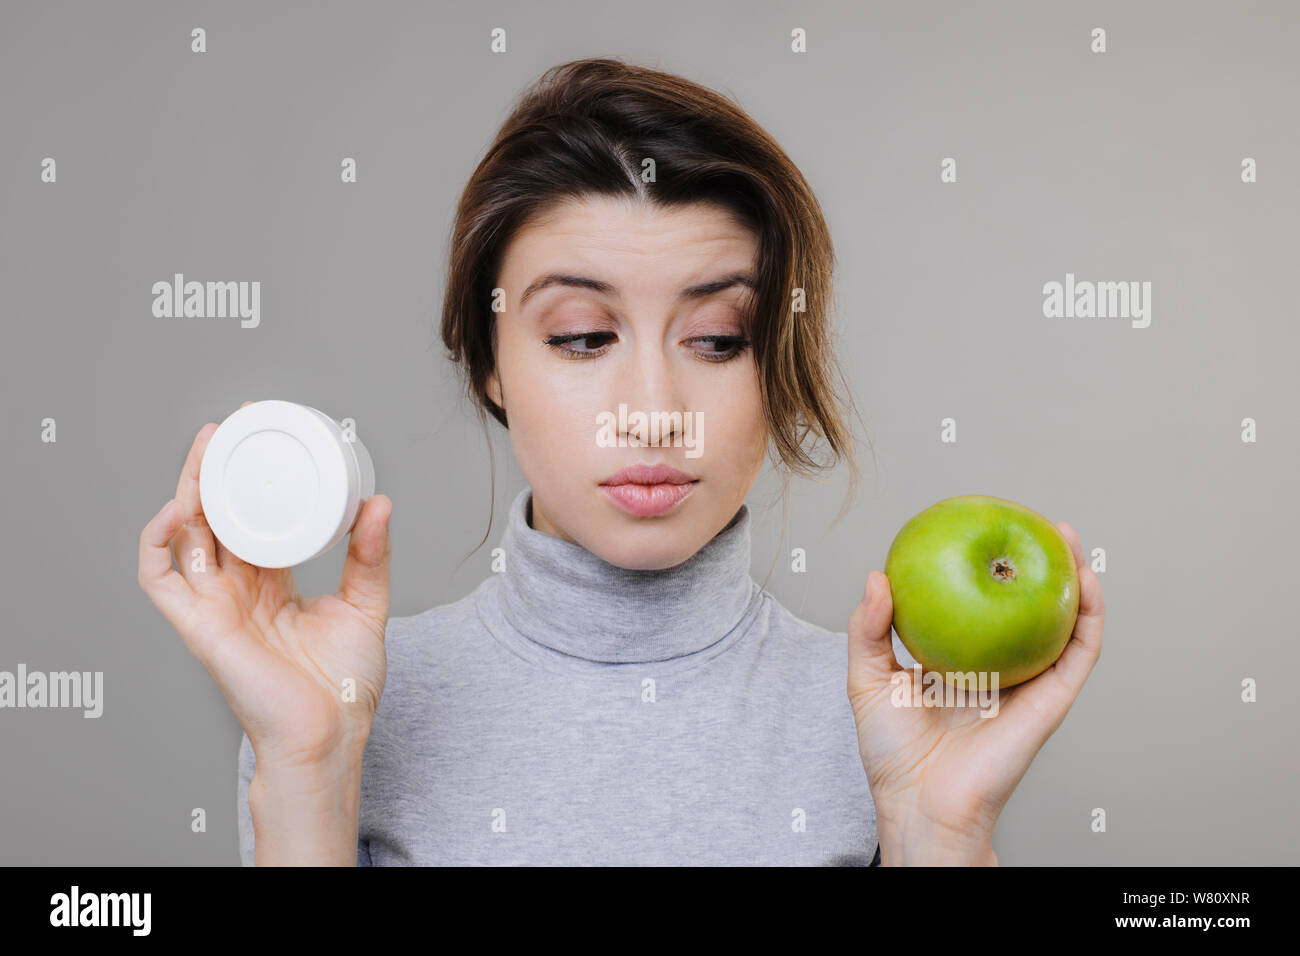 Pretty young woman holding a hyaluronic cream and a apple against a grey background and looking at apple. Lovely girl dressed in grey clothes making c Stock Photo